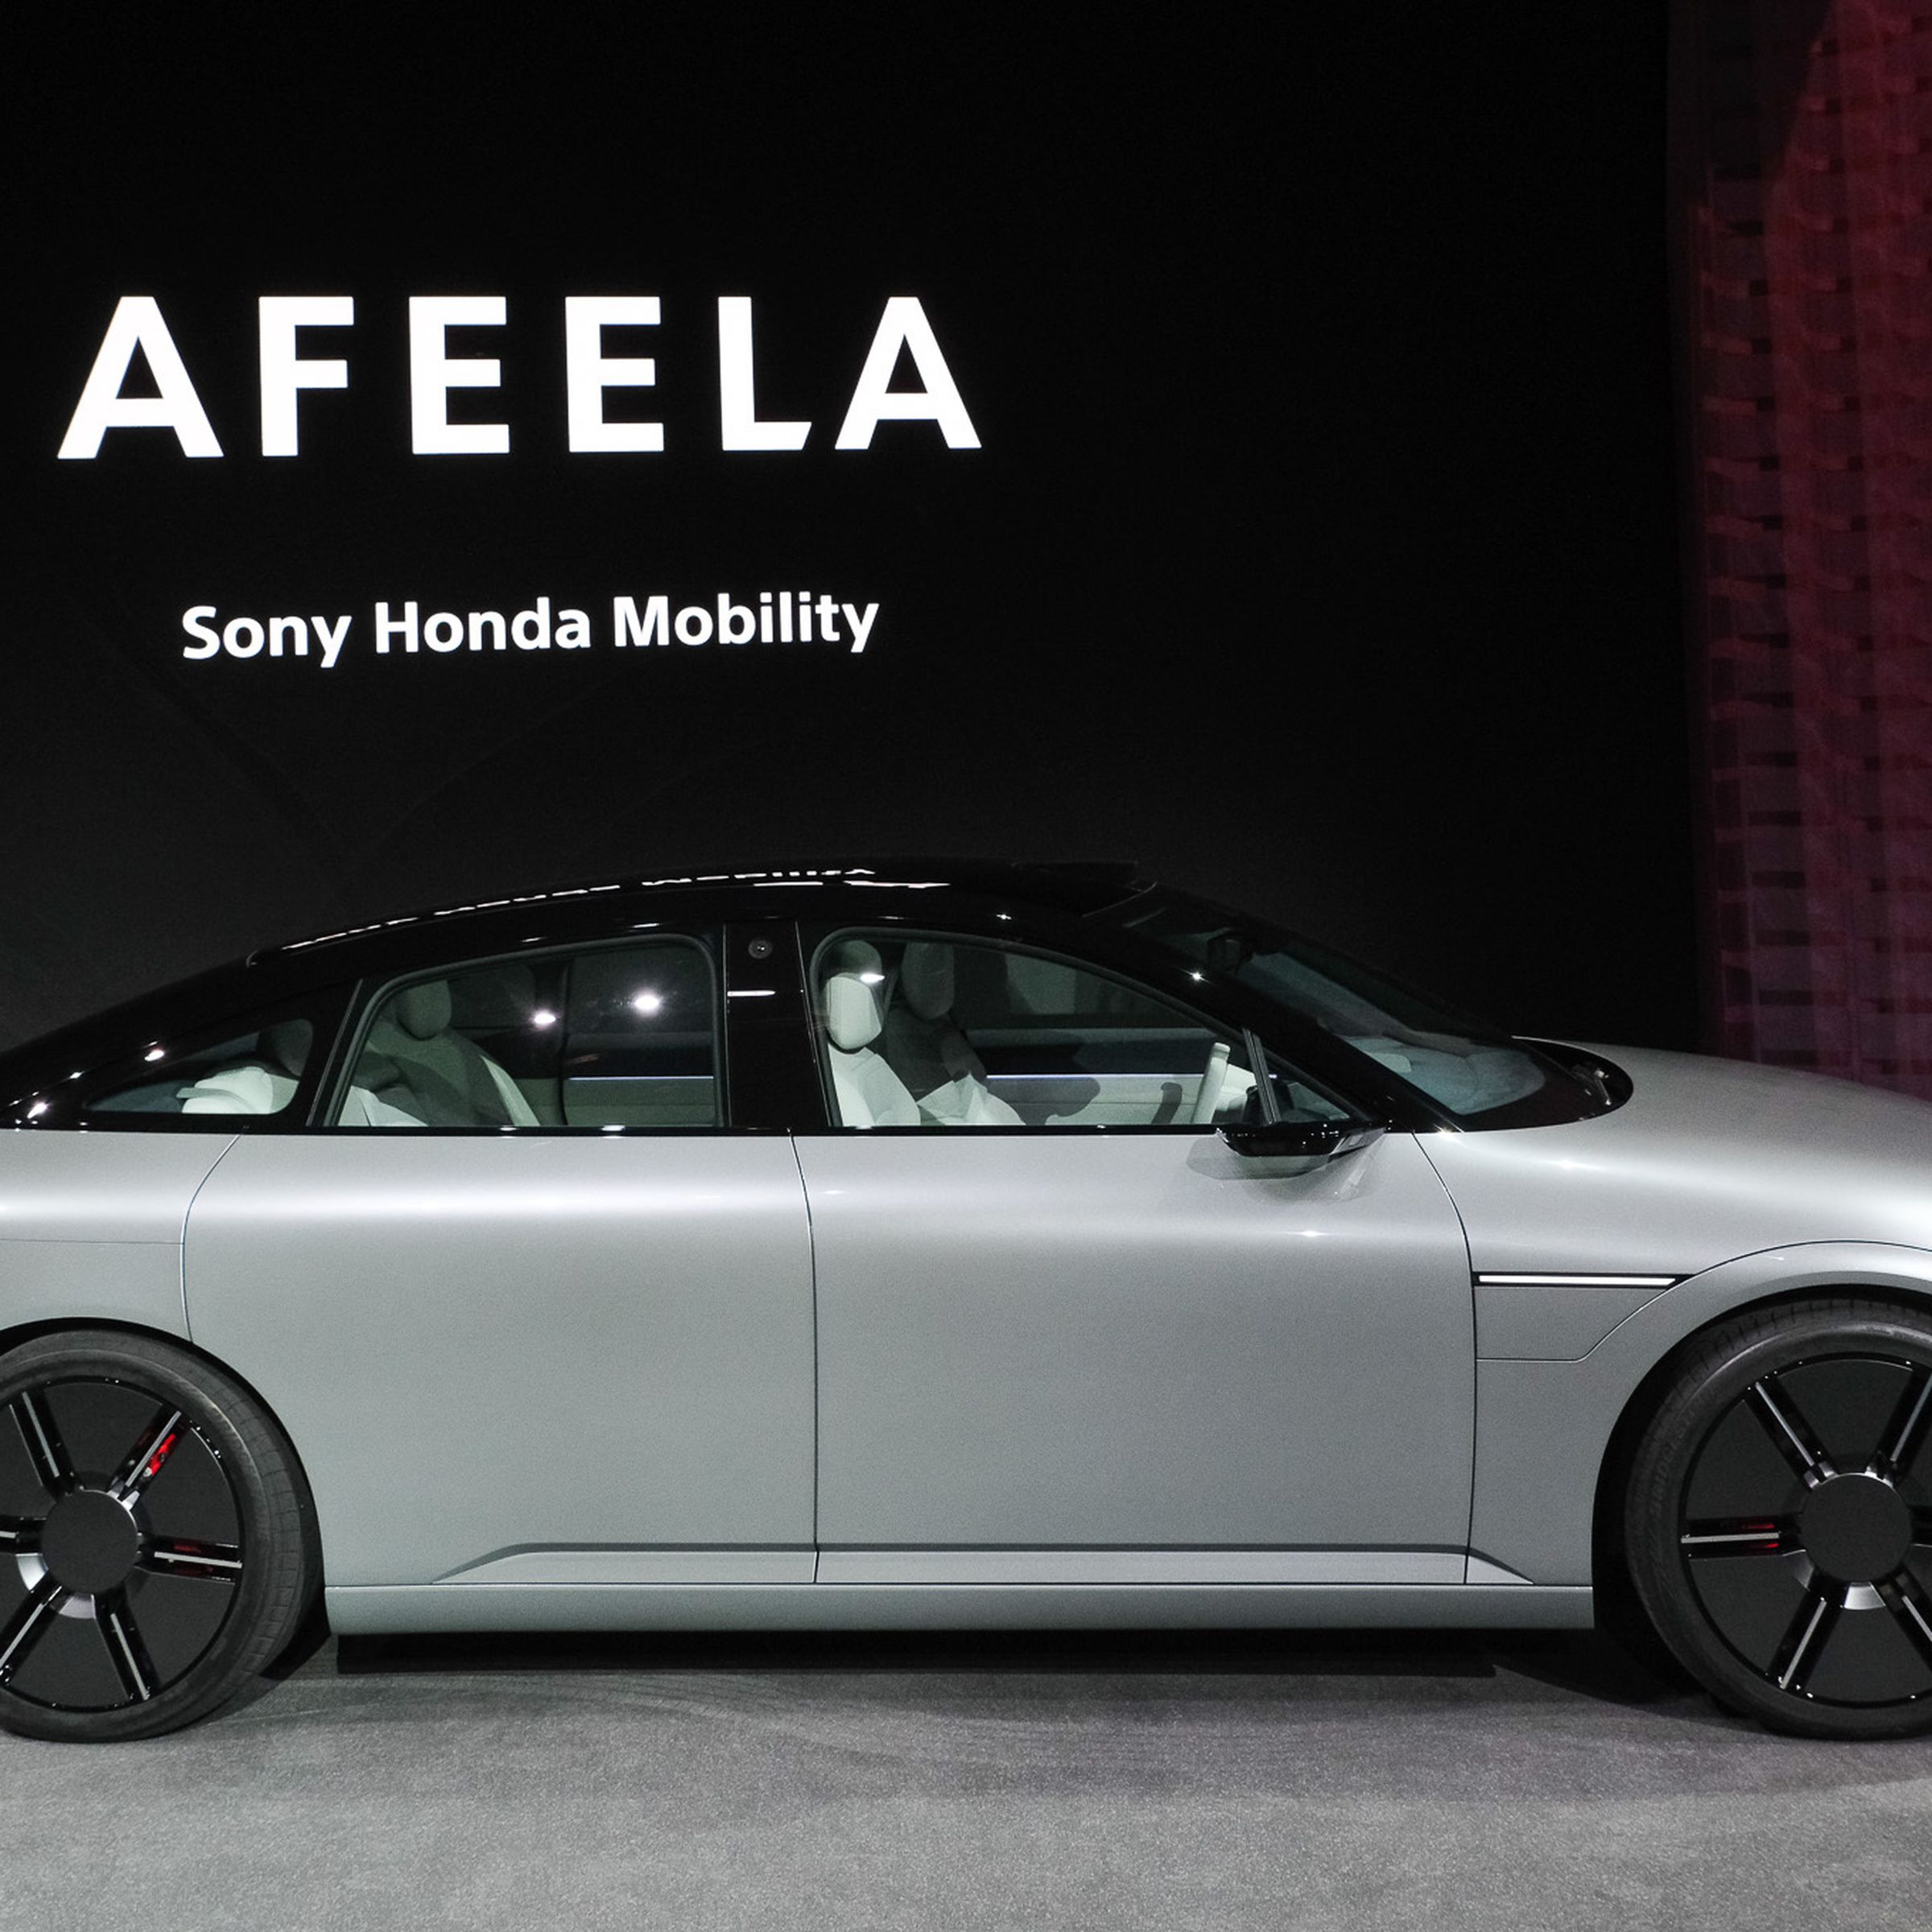 Afeela electric car from Sony and Honda